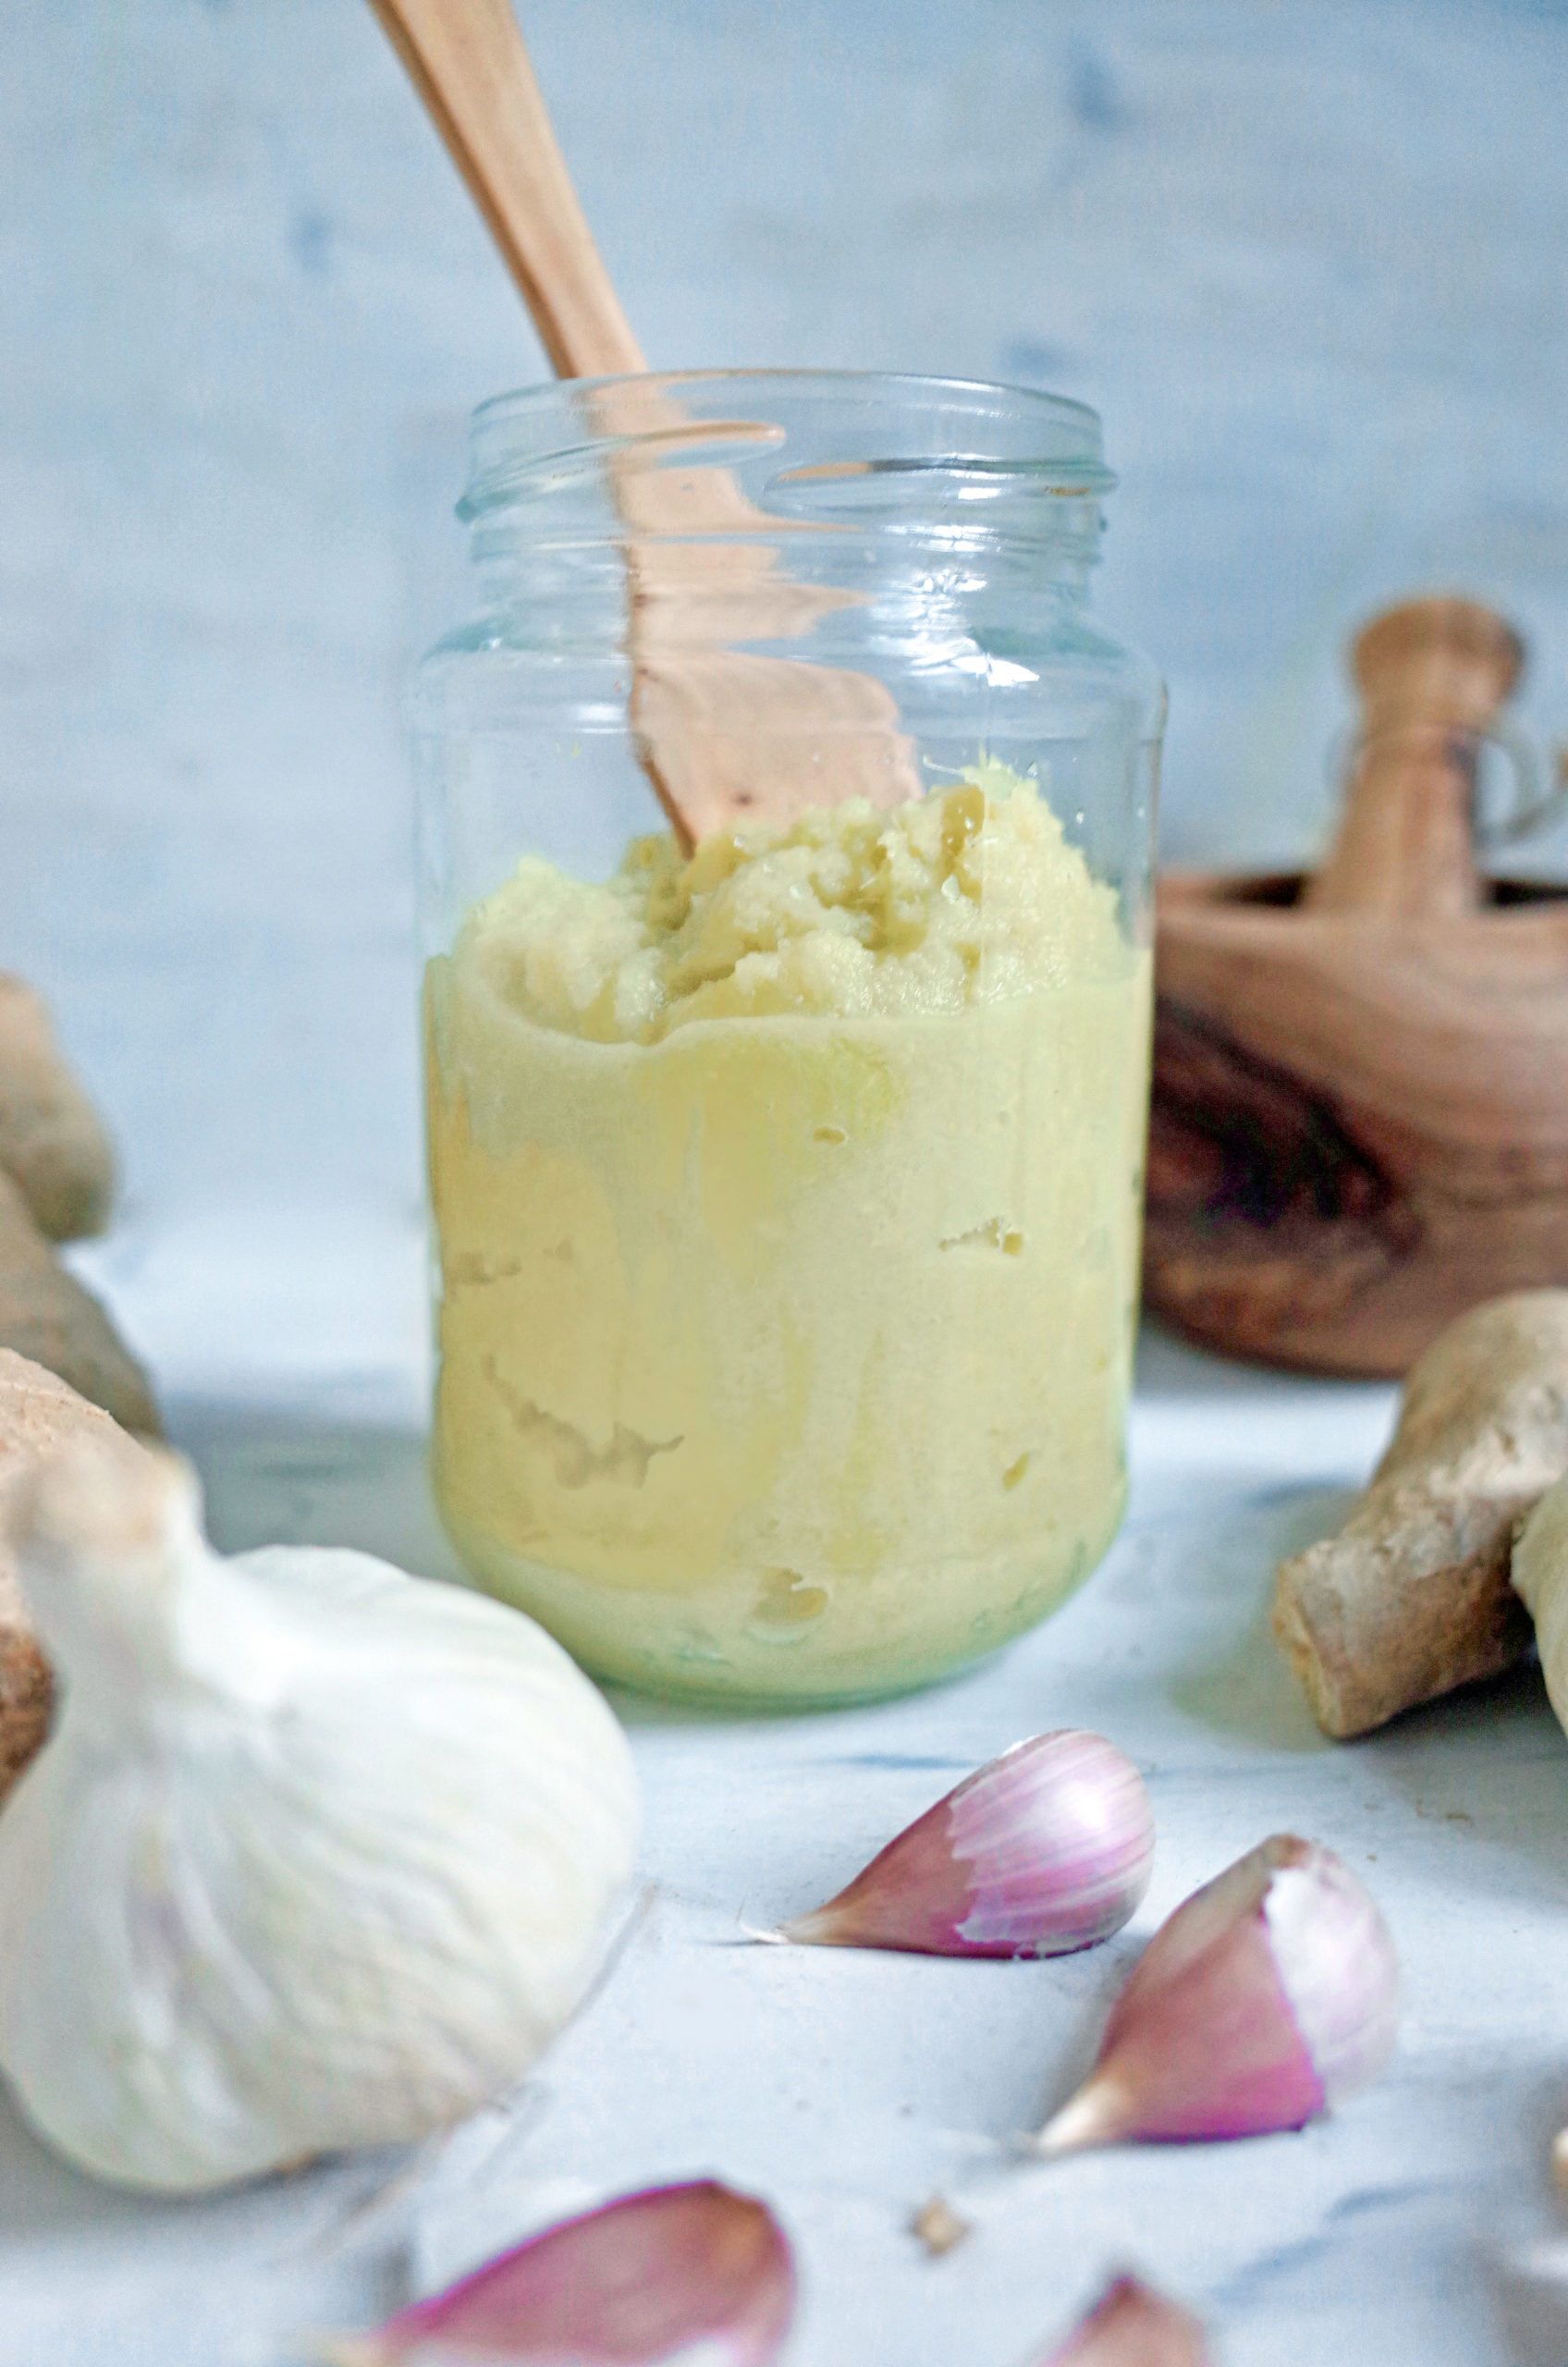 A jar of homemade ginger garlic paste with a wooden spoon and garlic bulbs